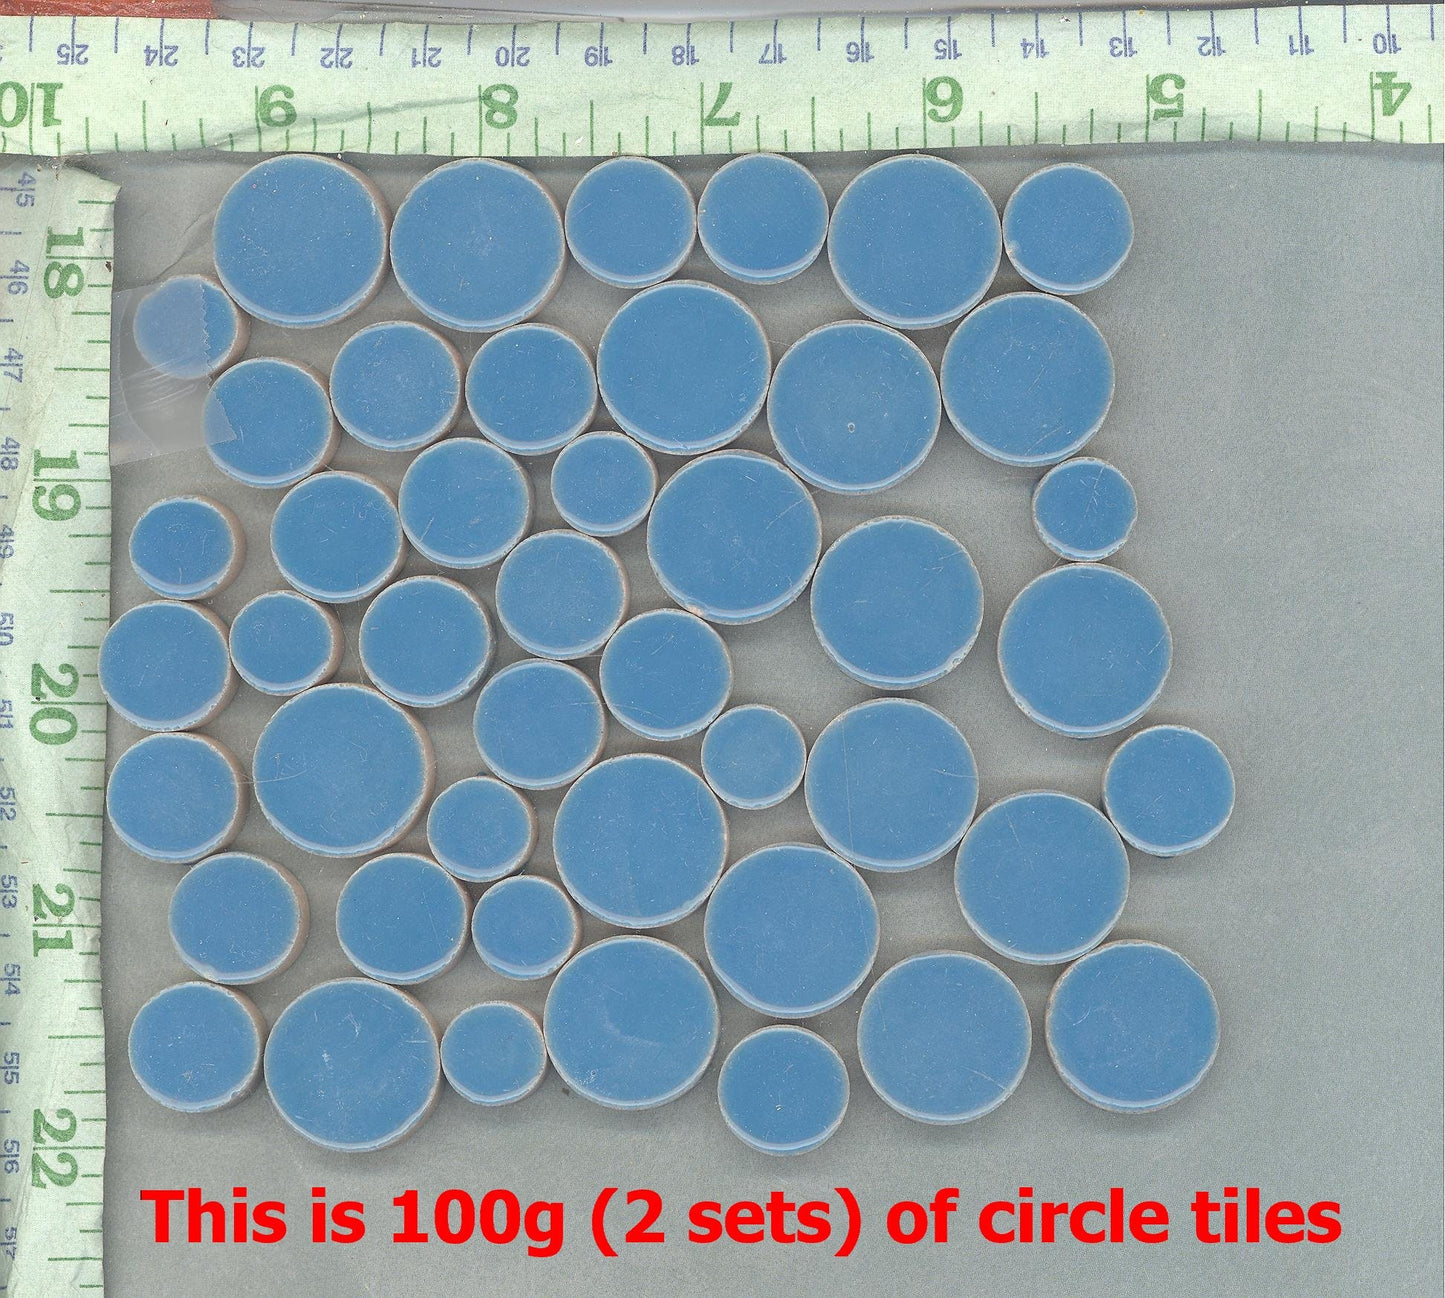 Silver Circles Mosaic Tiles - 50g Ceramic in Mix of 3 Sizes 1/2" and 3/4" and 5/8" Metallic